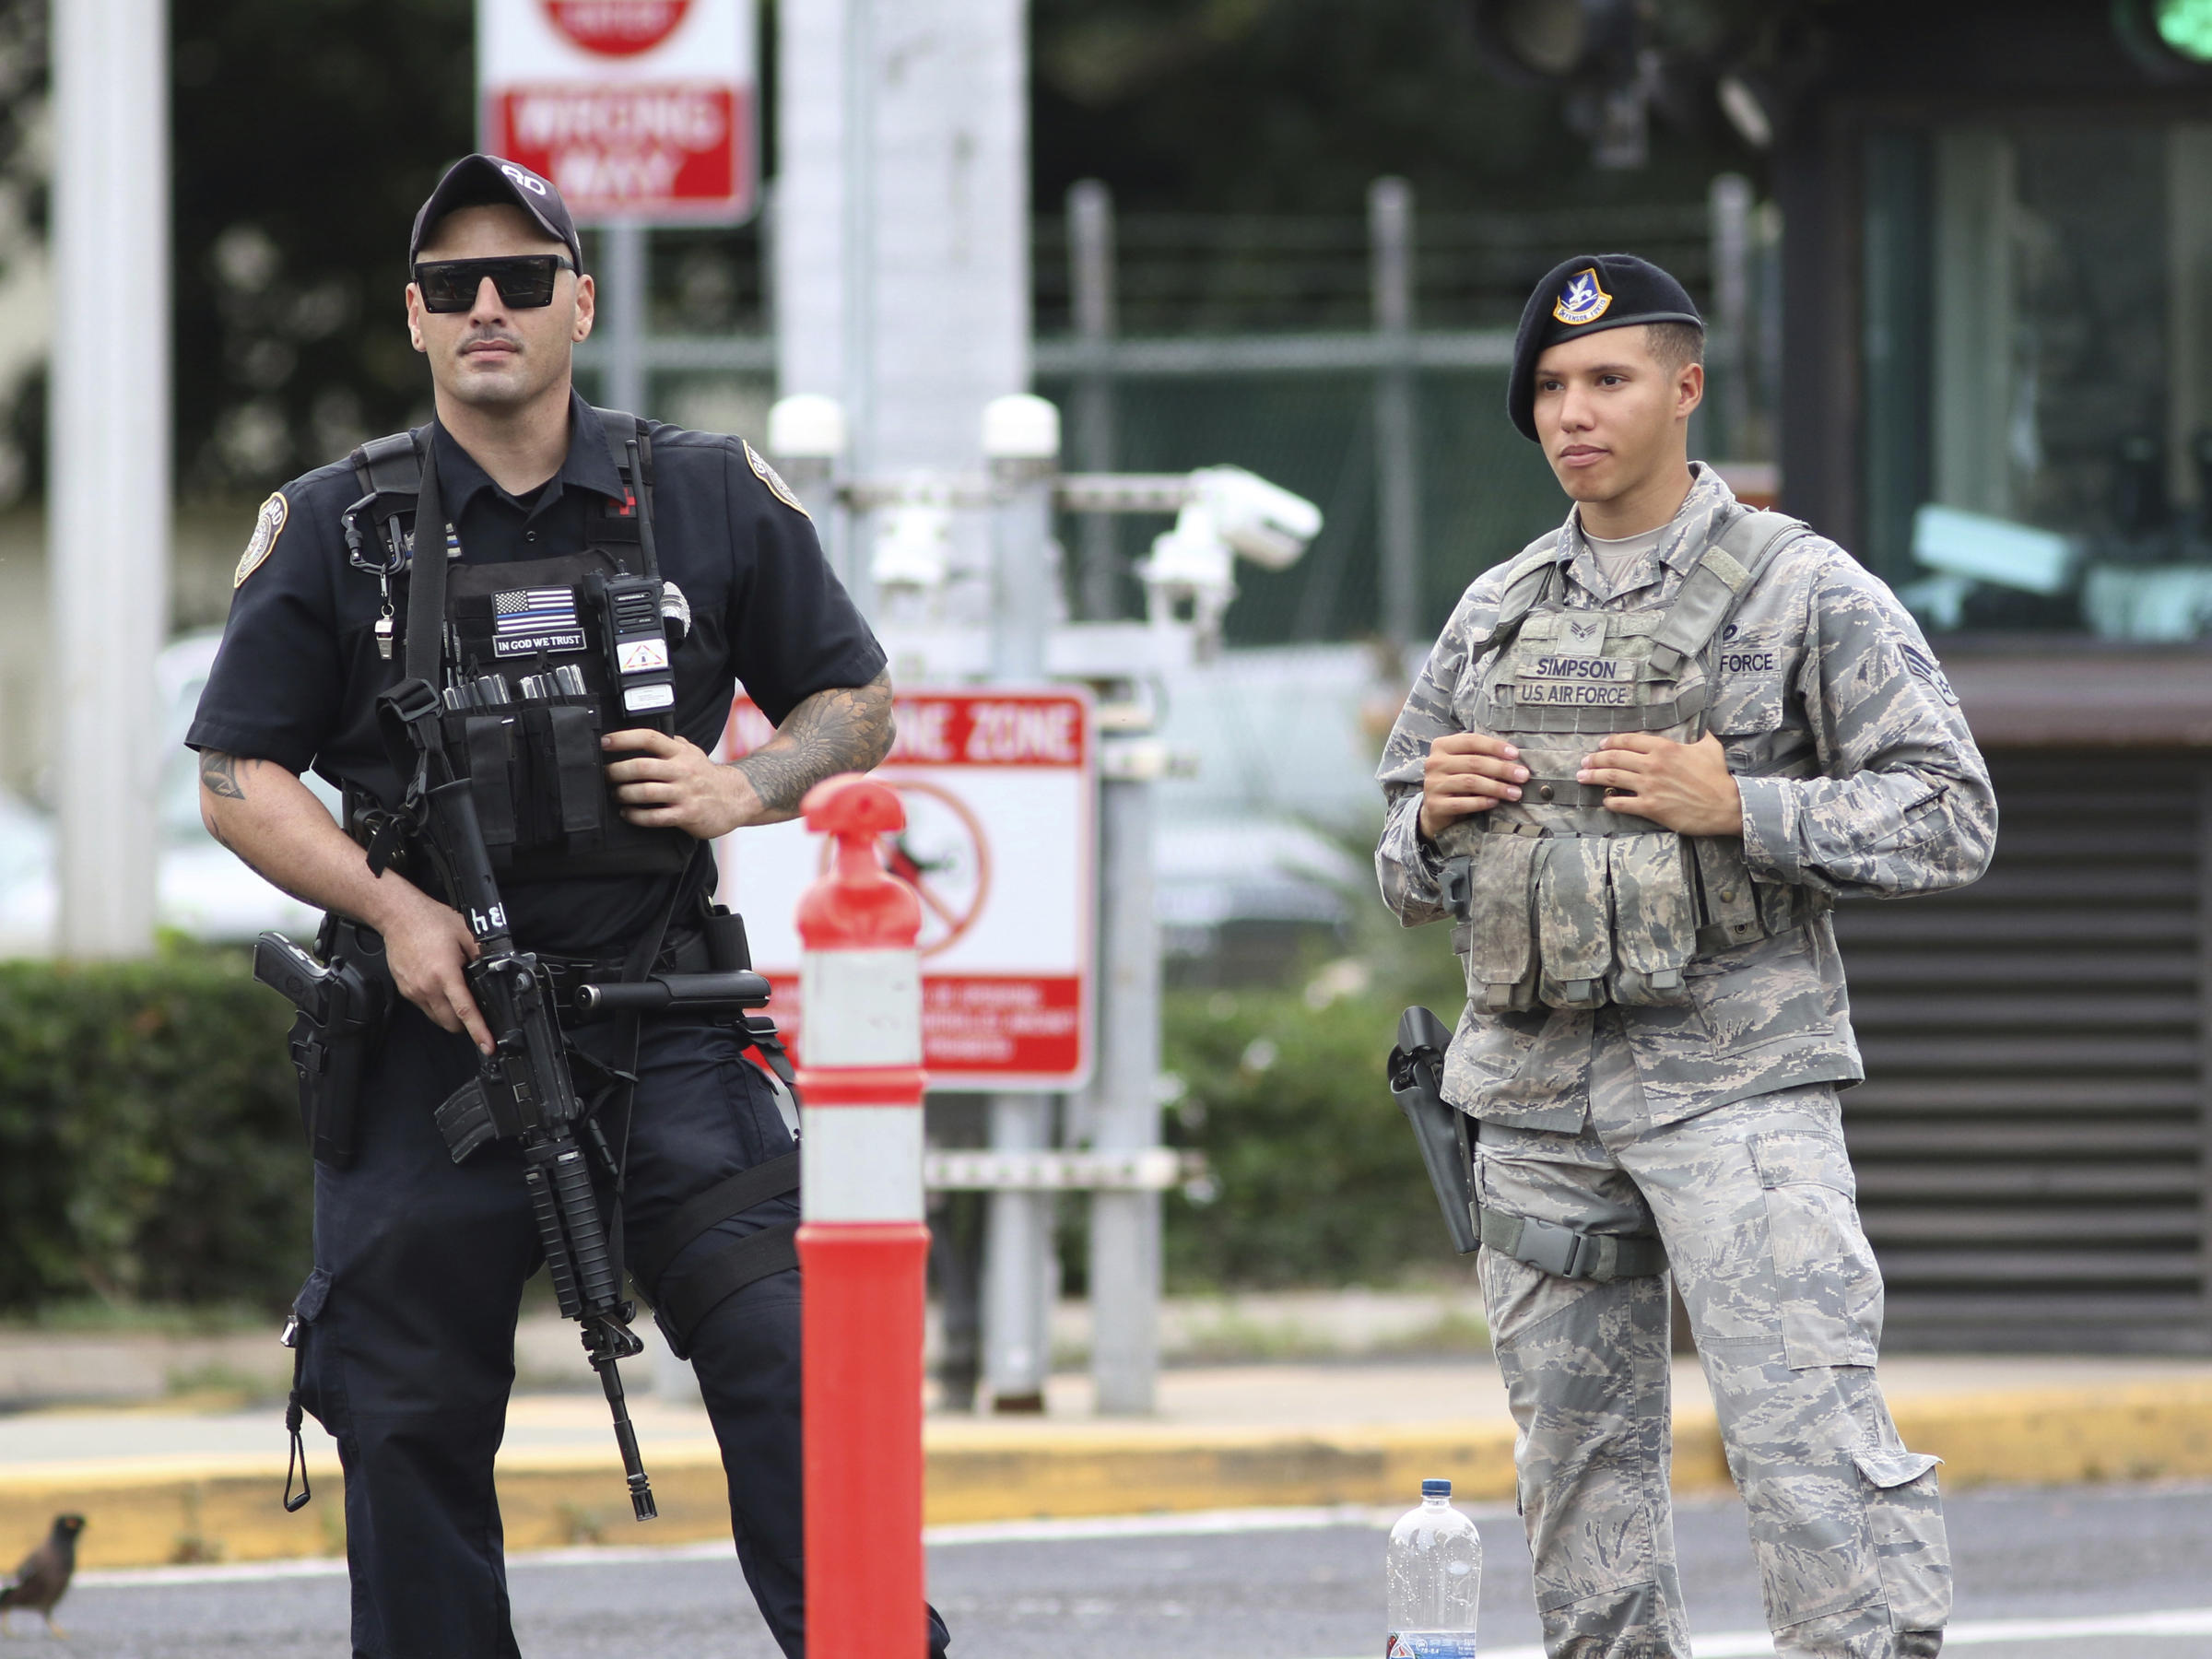 Tragedy at Pearl Harbor base, two dead, shooter commited suicide. Image via AP.